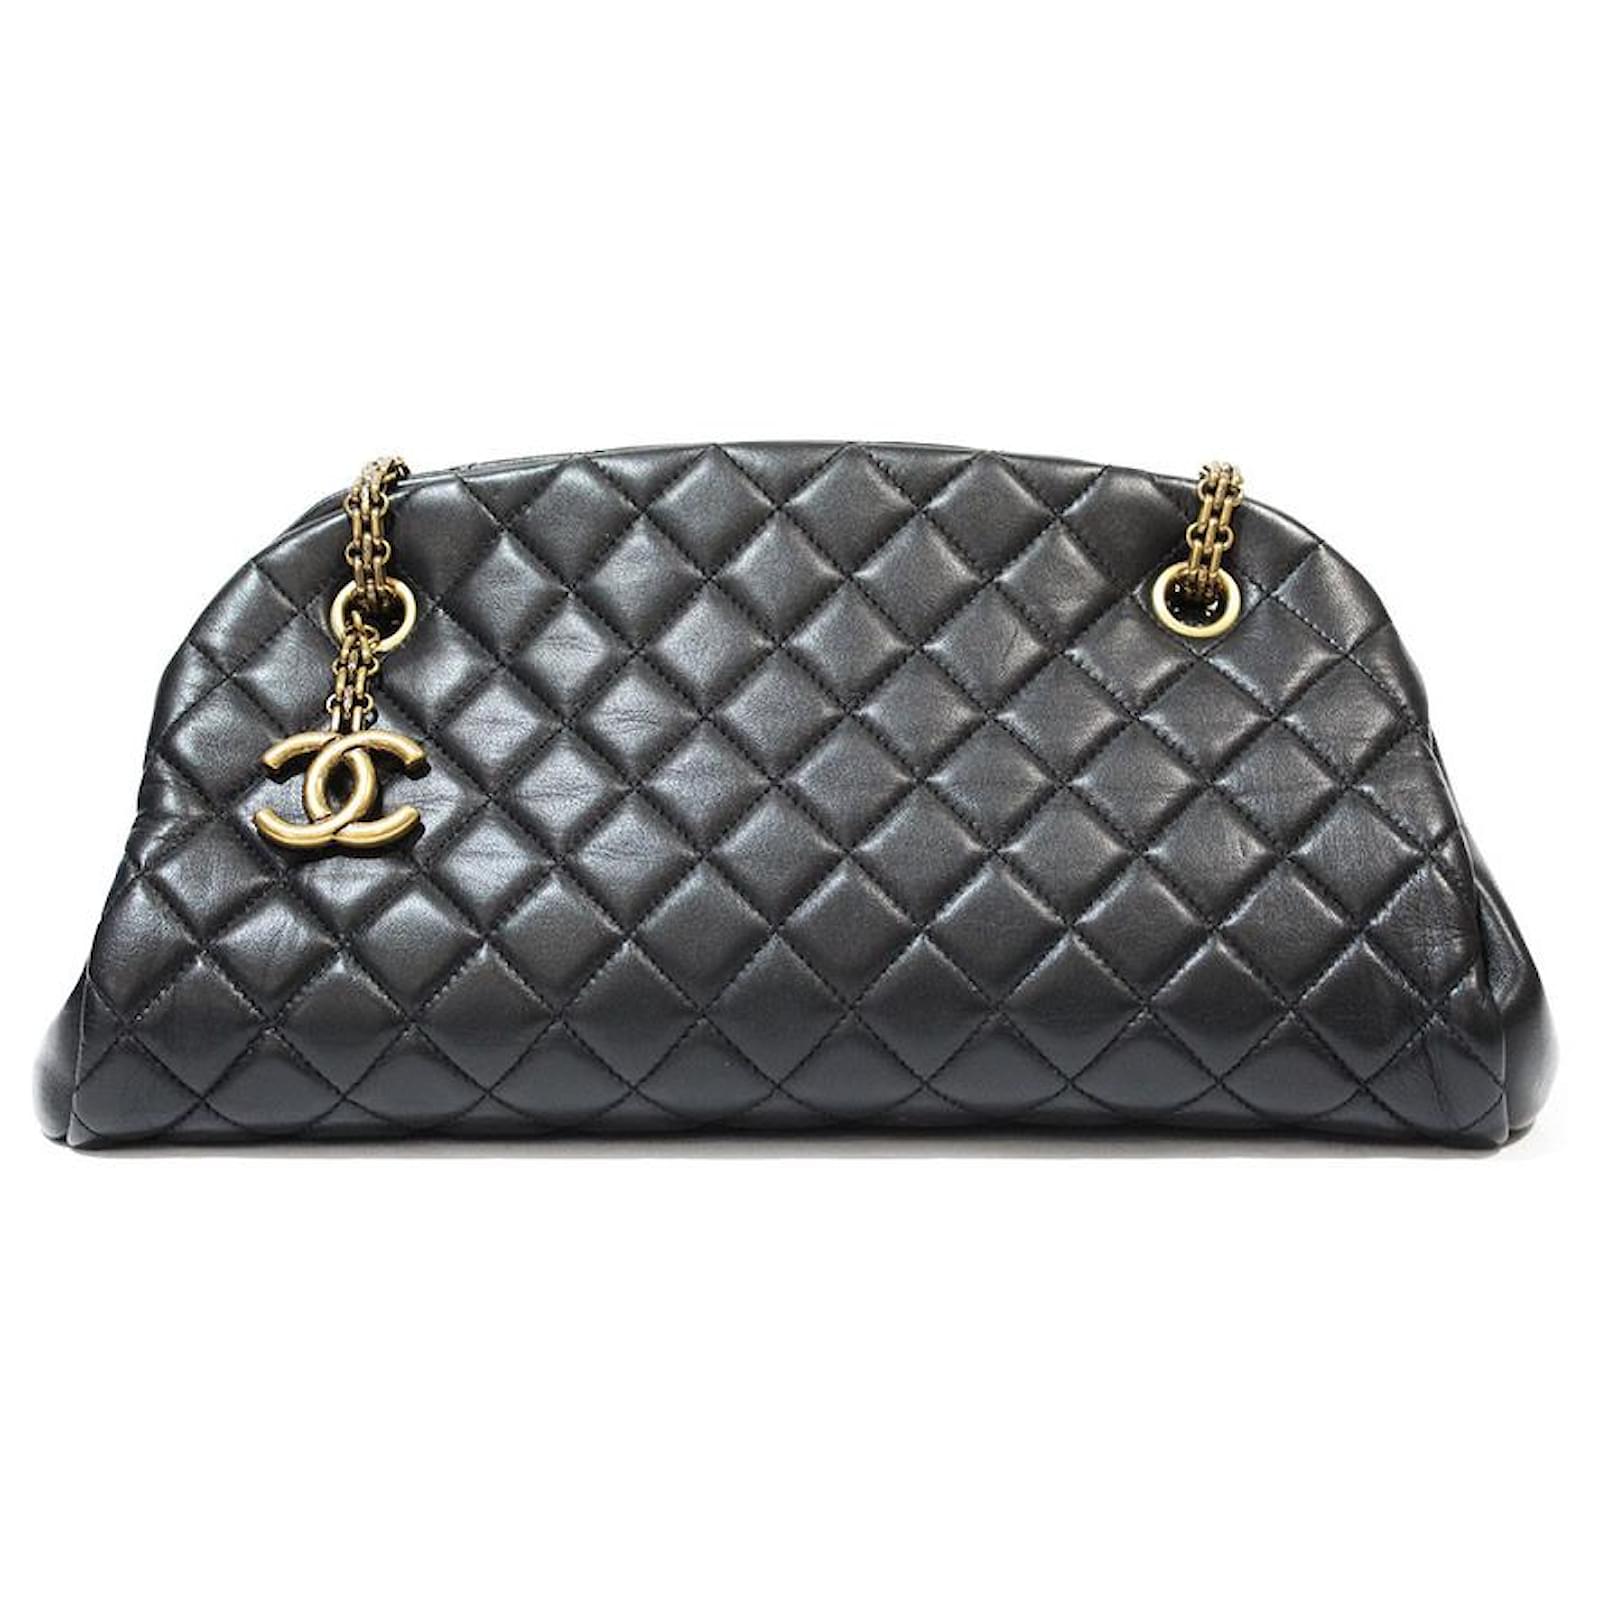 Pre Owned Chanel Black Lambskin Leather All Day Long Bowler Bag